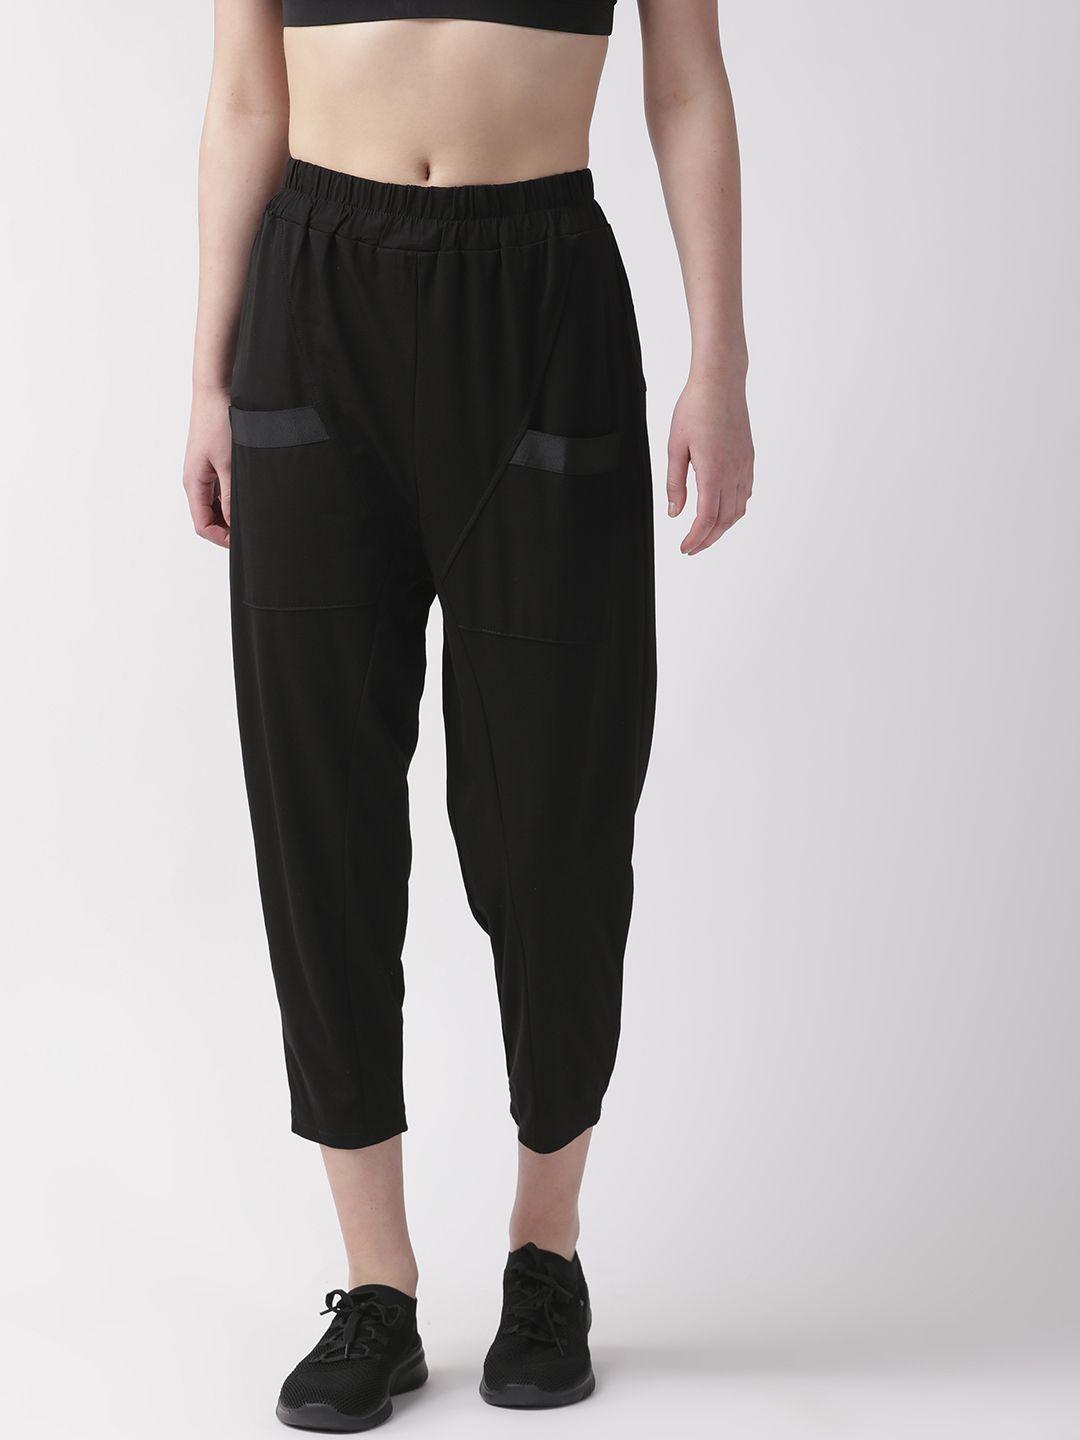 fitkin-women-black-relaxed-fit-3/4-solid-regular-trousers